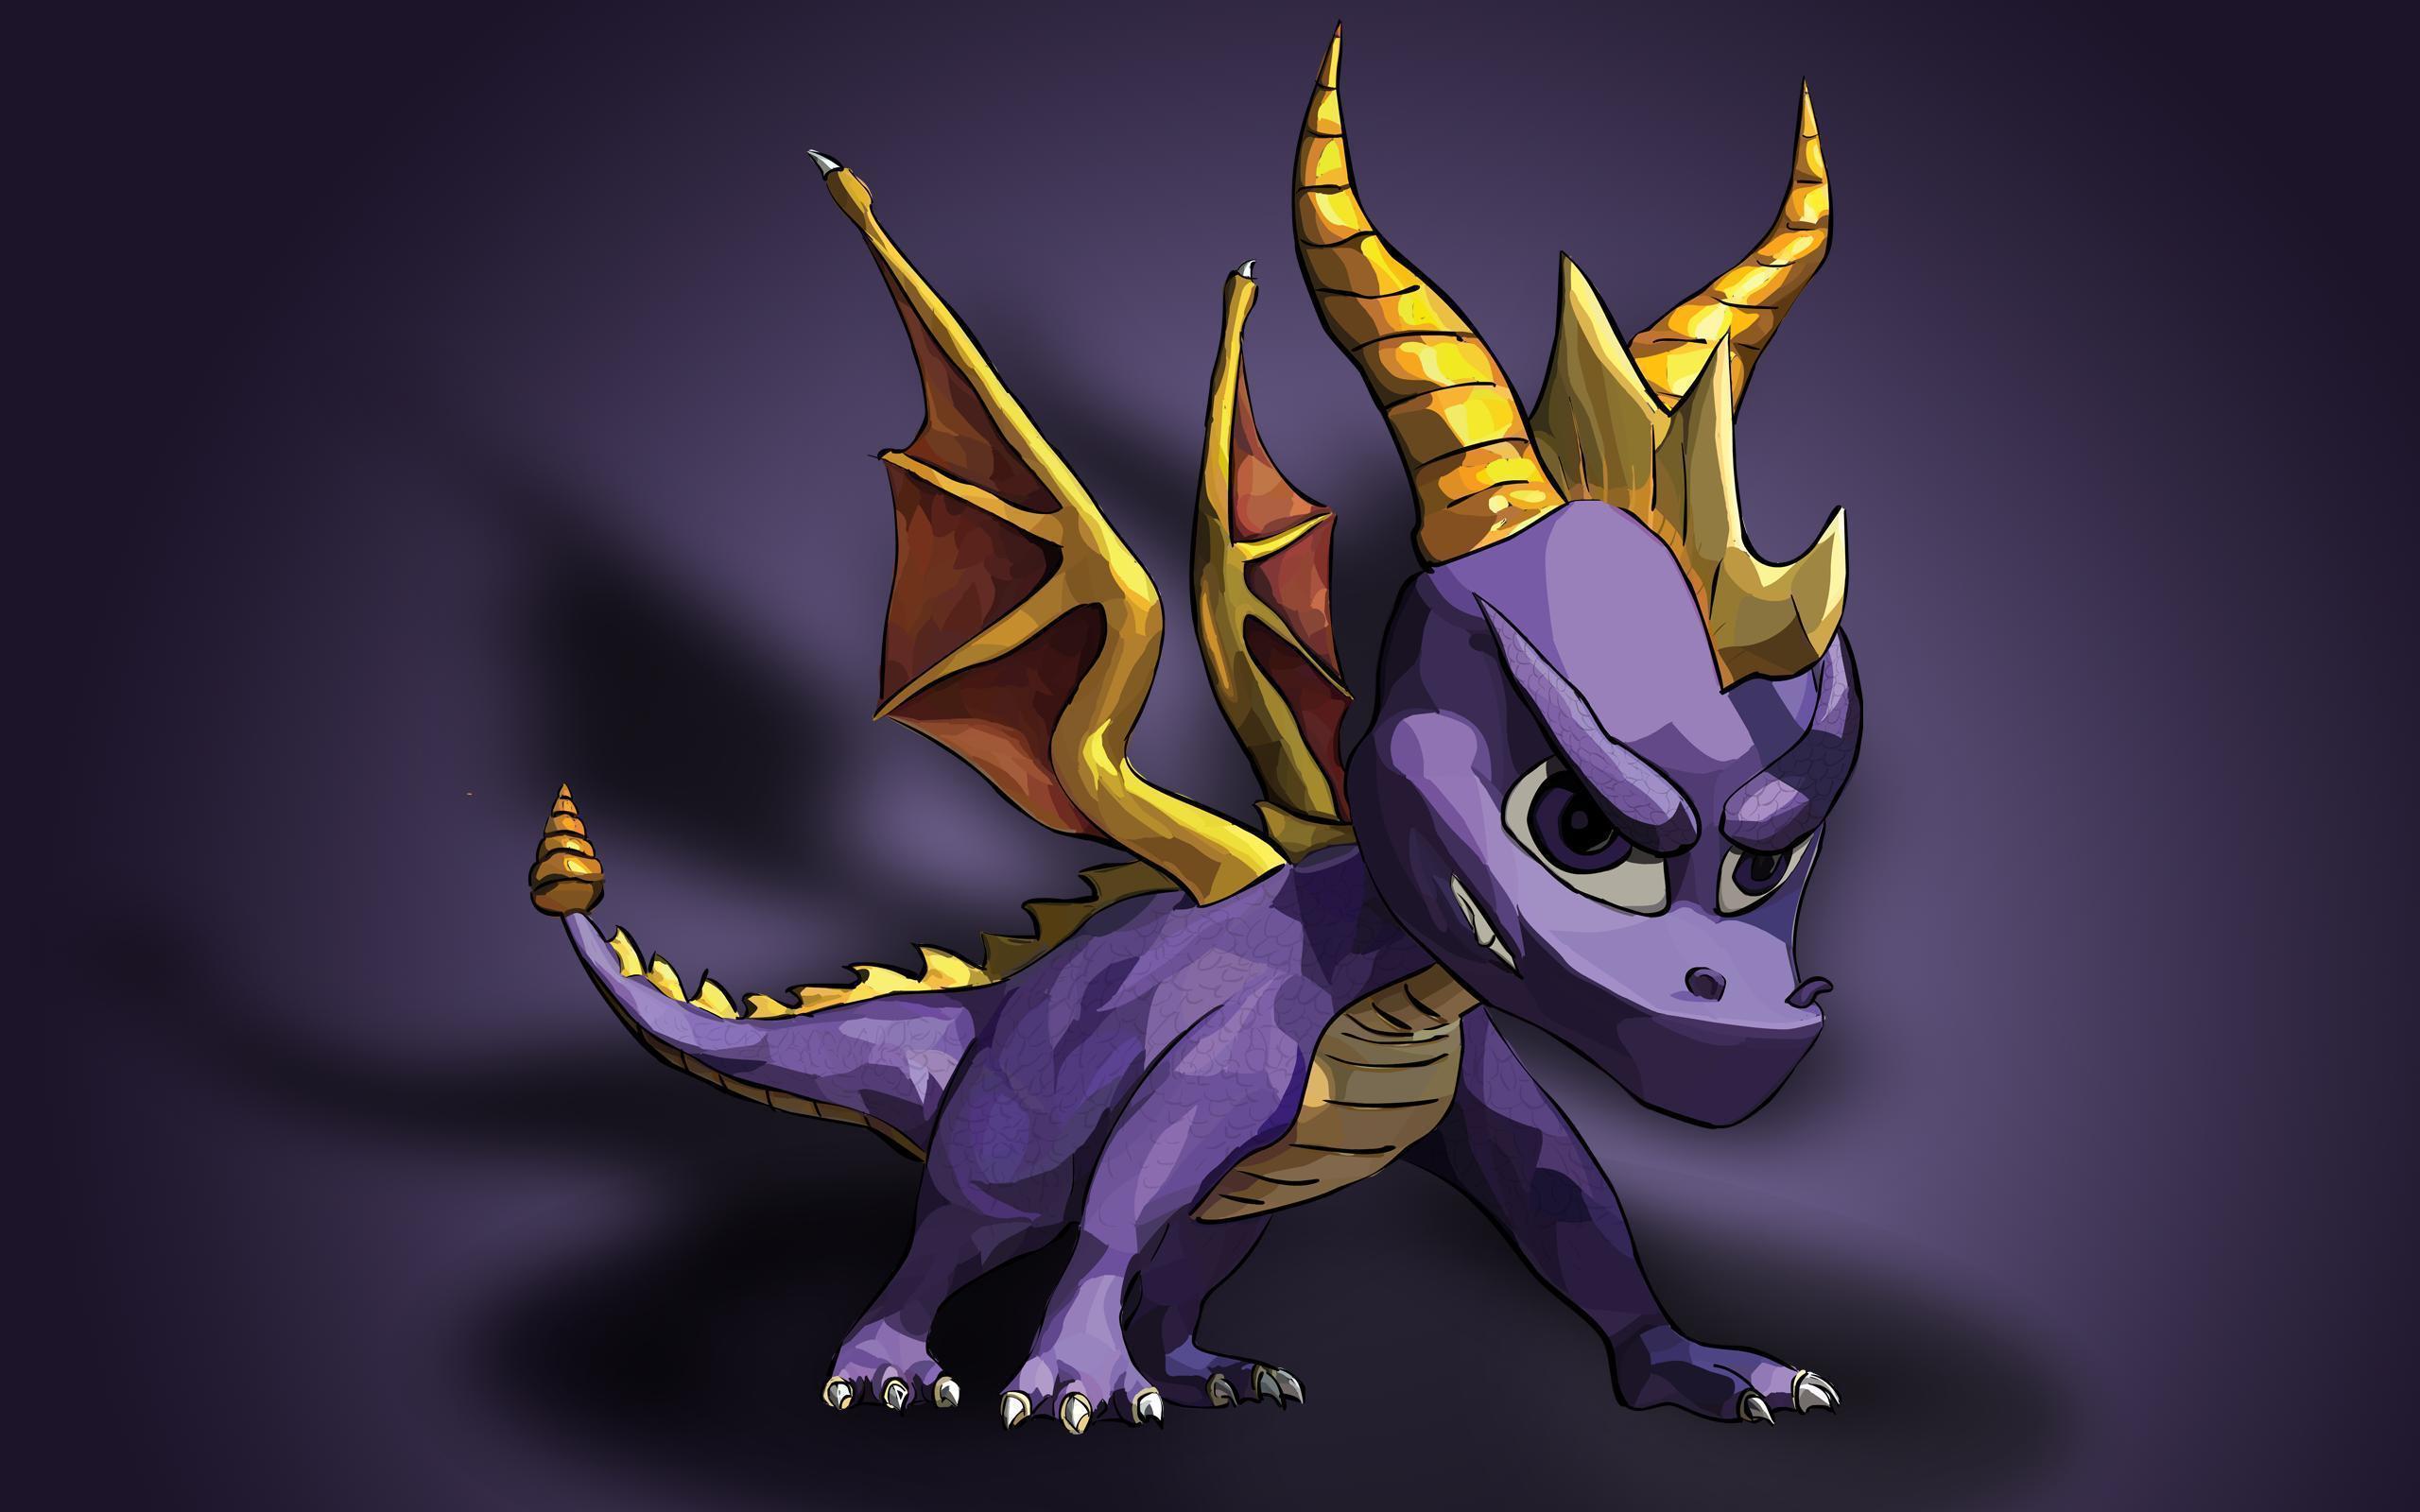 Spyro The Dragon Wallpapers Wallpaper Cave